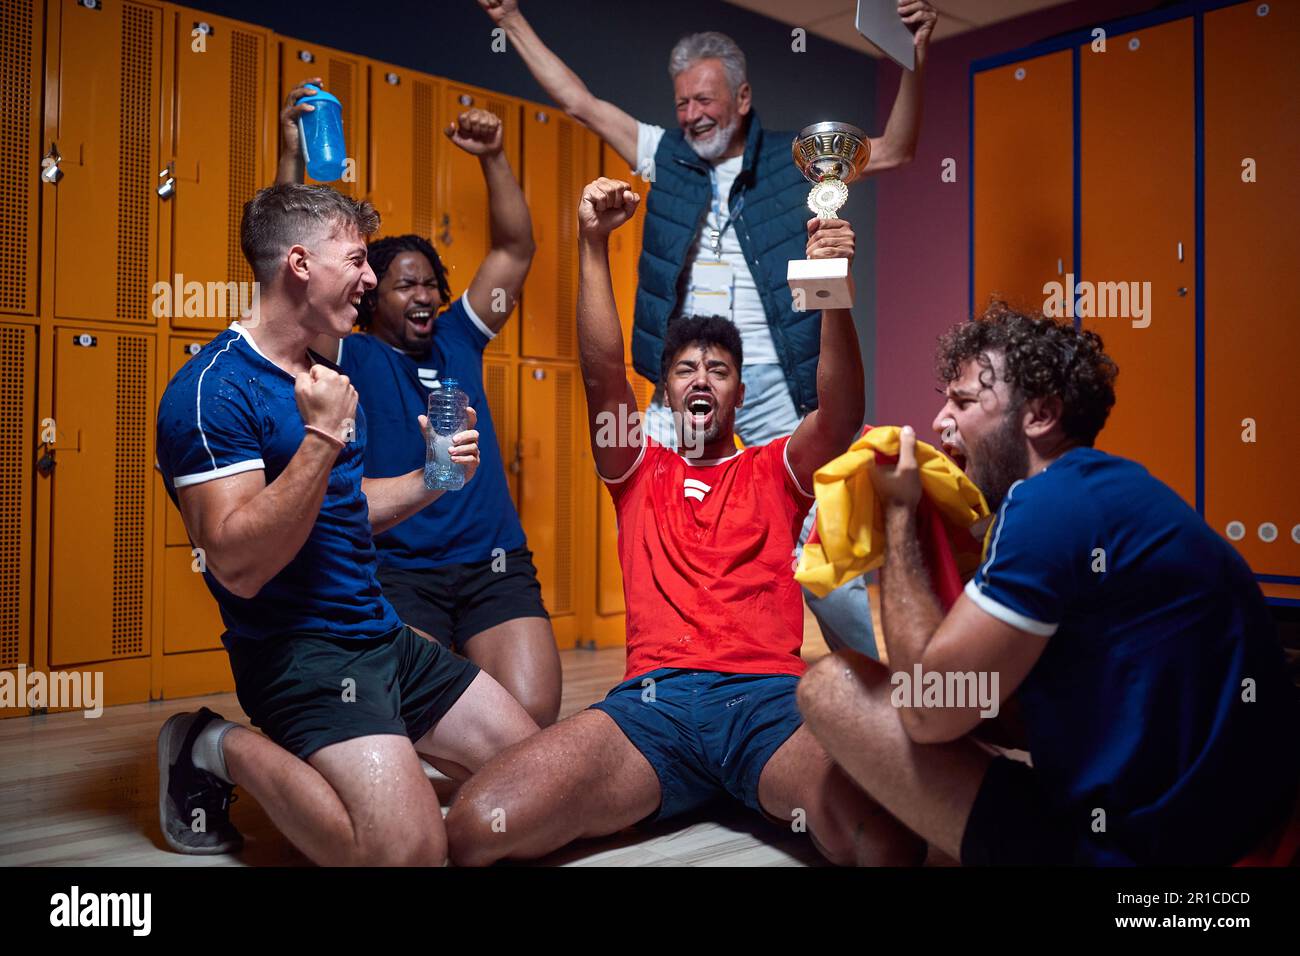 Group of young football players celebrating success in the locker room with their senior coach in the background. Sports, active lifestyle concept. Stock Photo